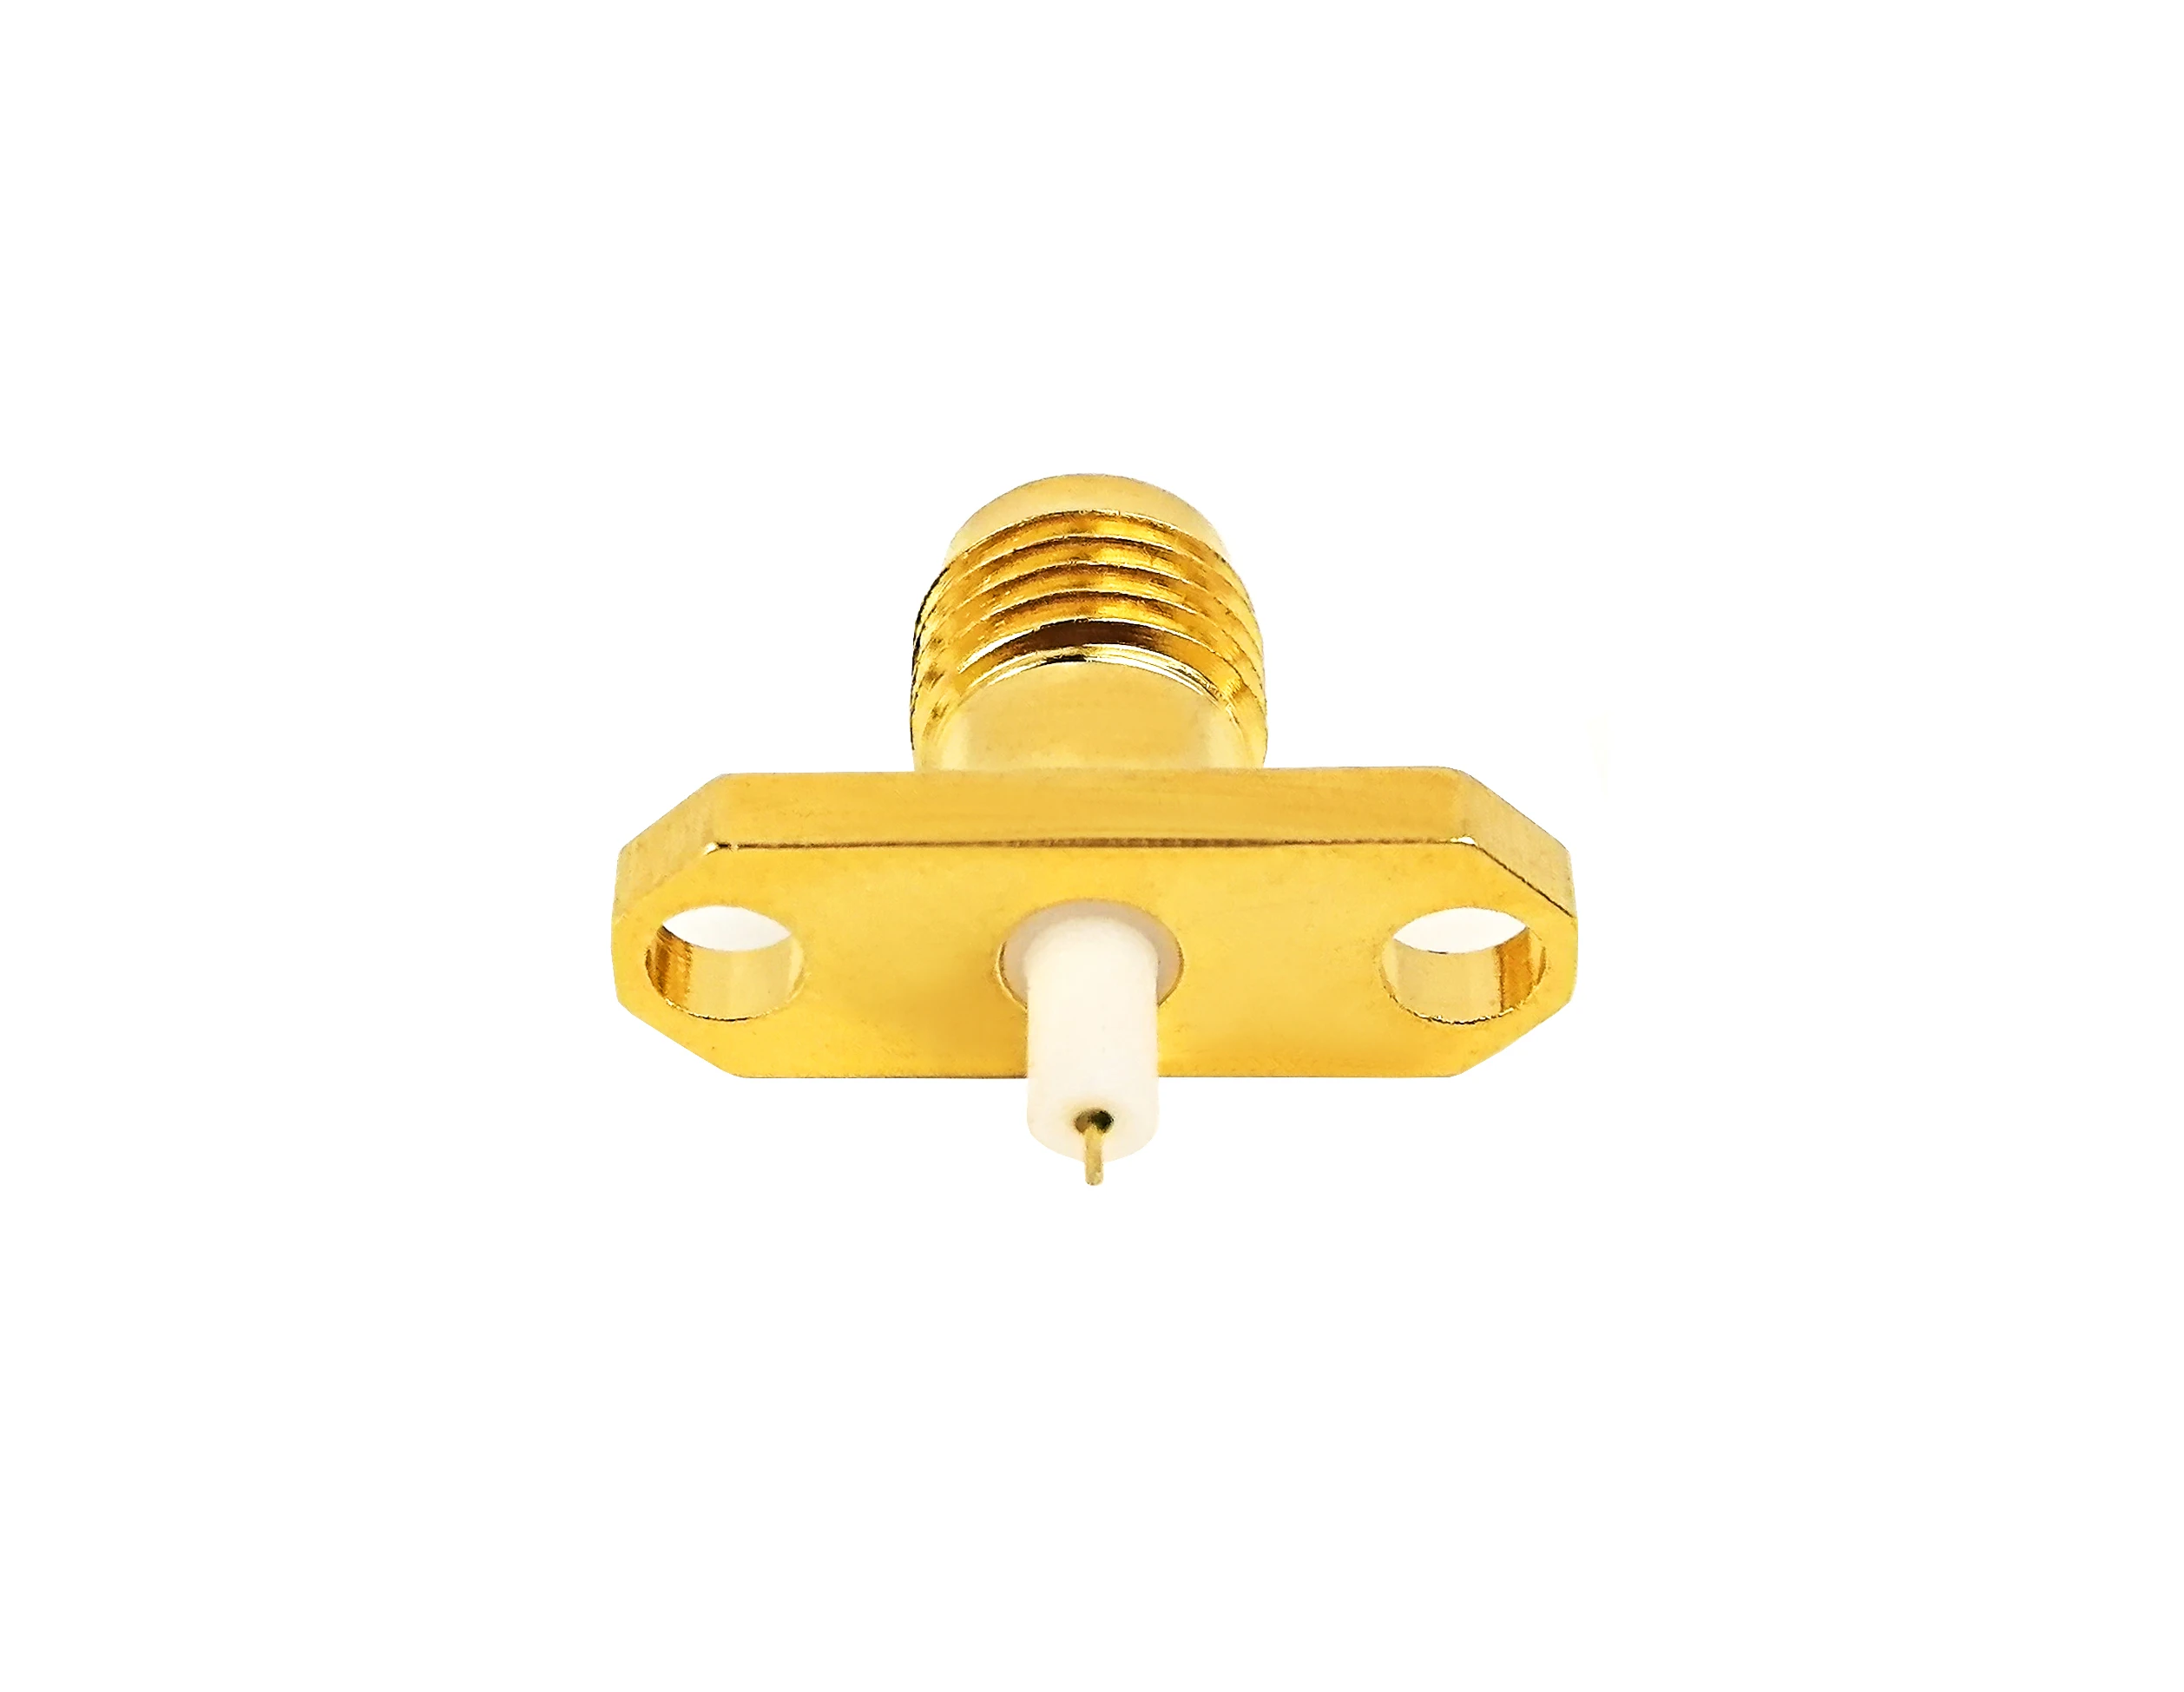 SMA Gold plated  sma female jack 2 hole flange pcb conector rf coaxial connectors supplier